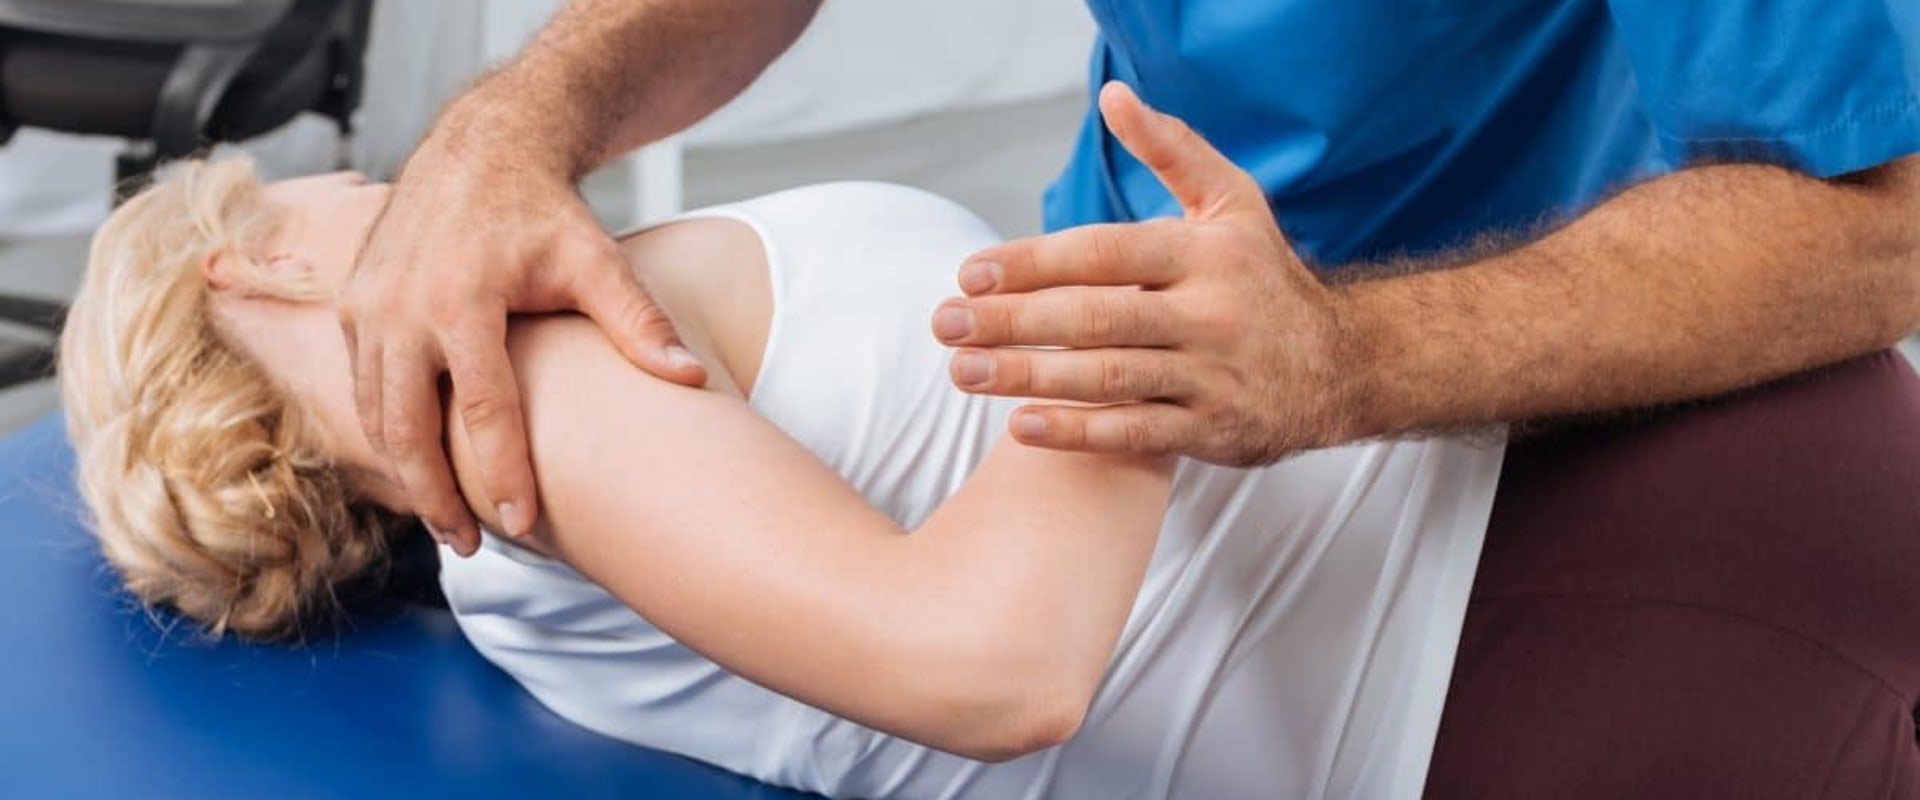 Are frequent chiropractic adjustments good for you?